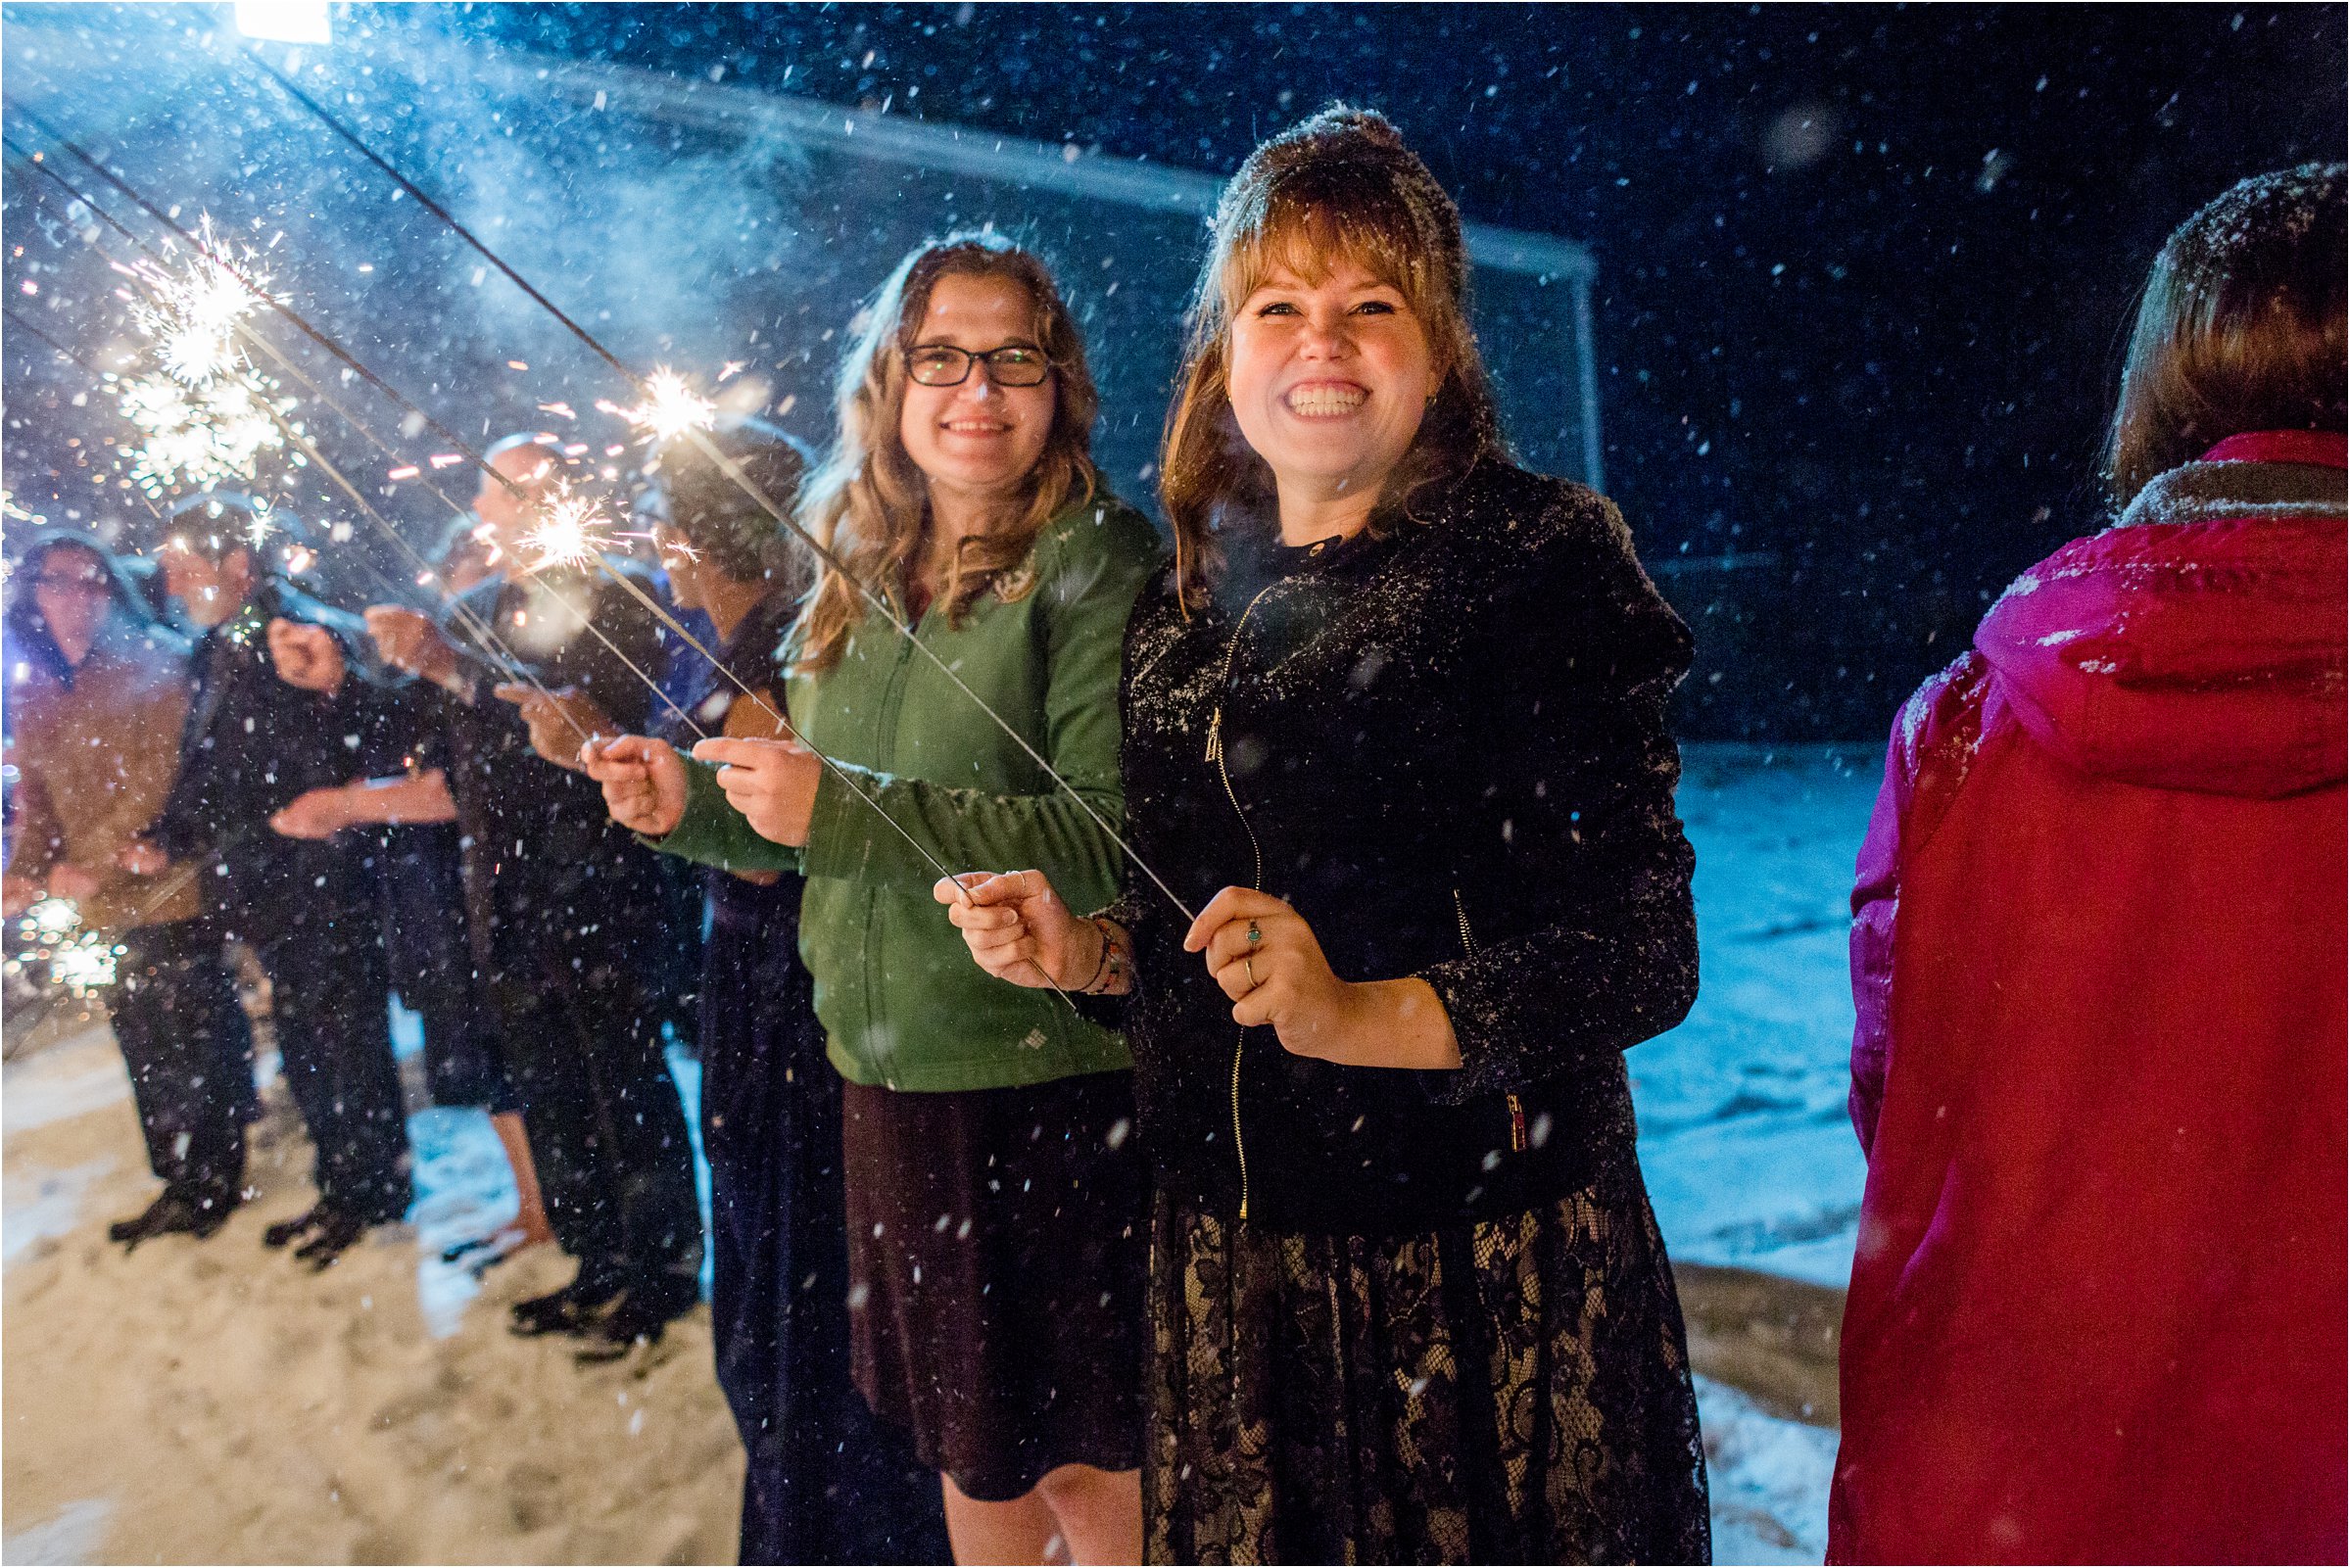 wedding guests holding sparklers waiting for the bride and groom to make their exit in the snow